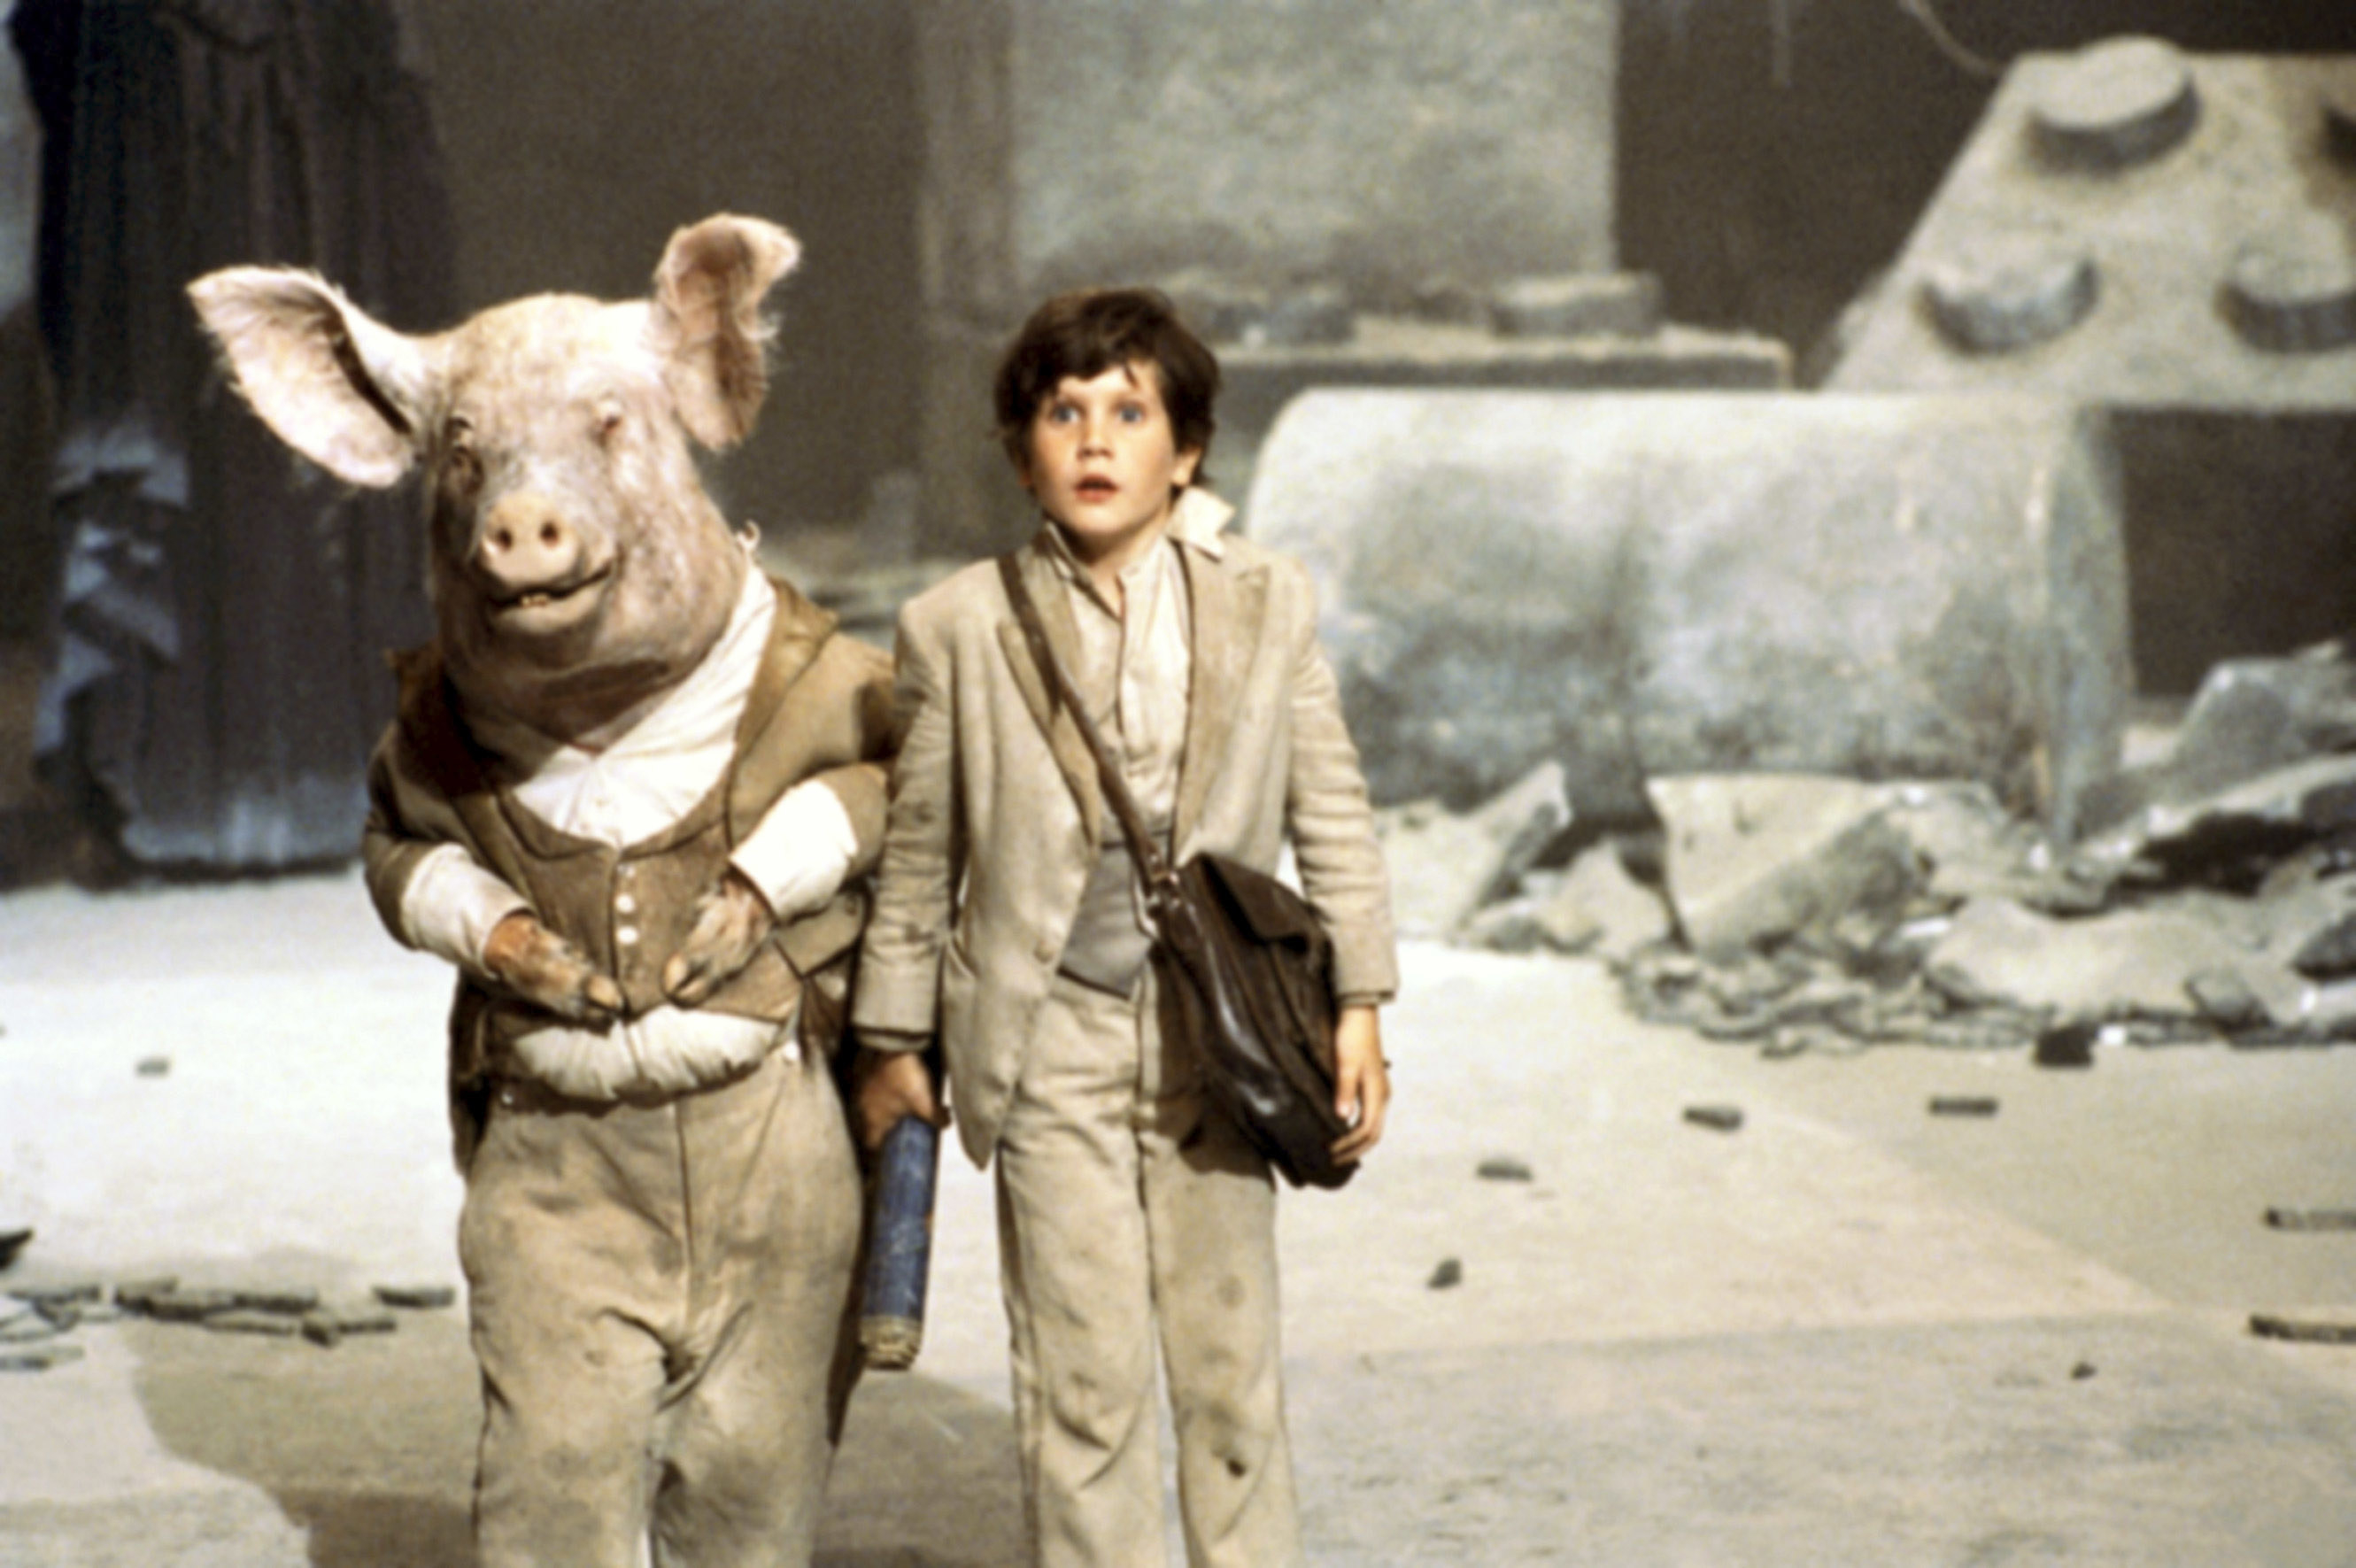 Craig Warnock walking next to someone with a pig&#x27;s head.